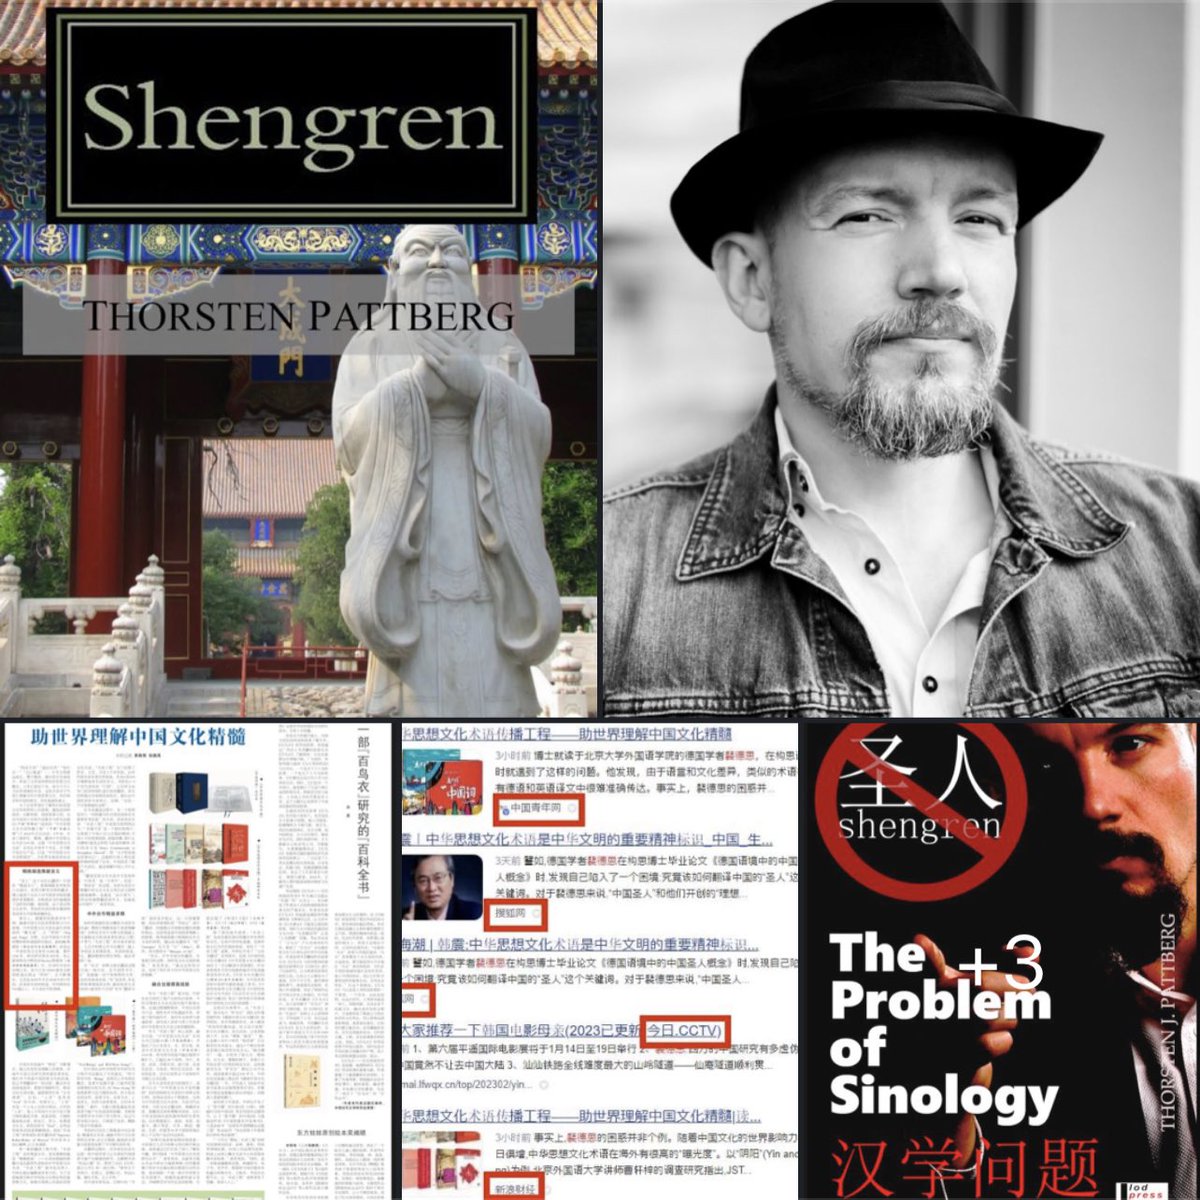 Do you know what a 'Shengren' is? The Shengren is an untranslatable Chinese archetype of knowledge. He is above philosophy and beyond religion. '圣人'就是圣人。

amazon.com/gp/aw/d/098420…

#Shengren #ChineseThought #Translation #ChinaStudies #圣人 #中华思想文化术语 #裴德思